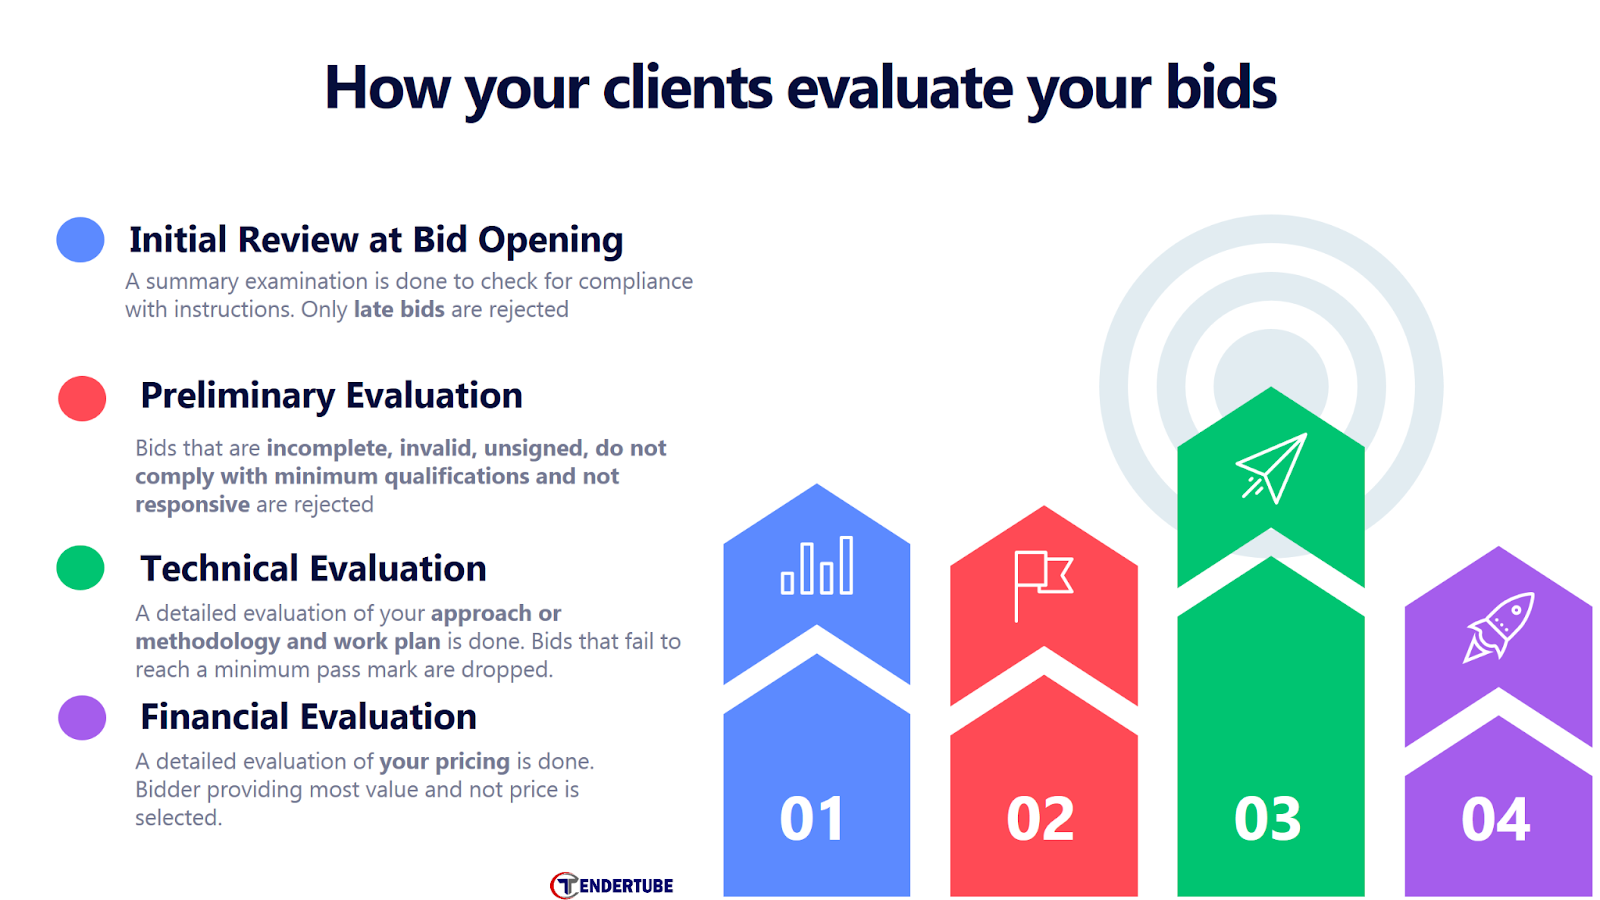  Tendertube | How your clients evaluate your bids 